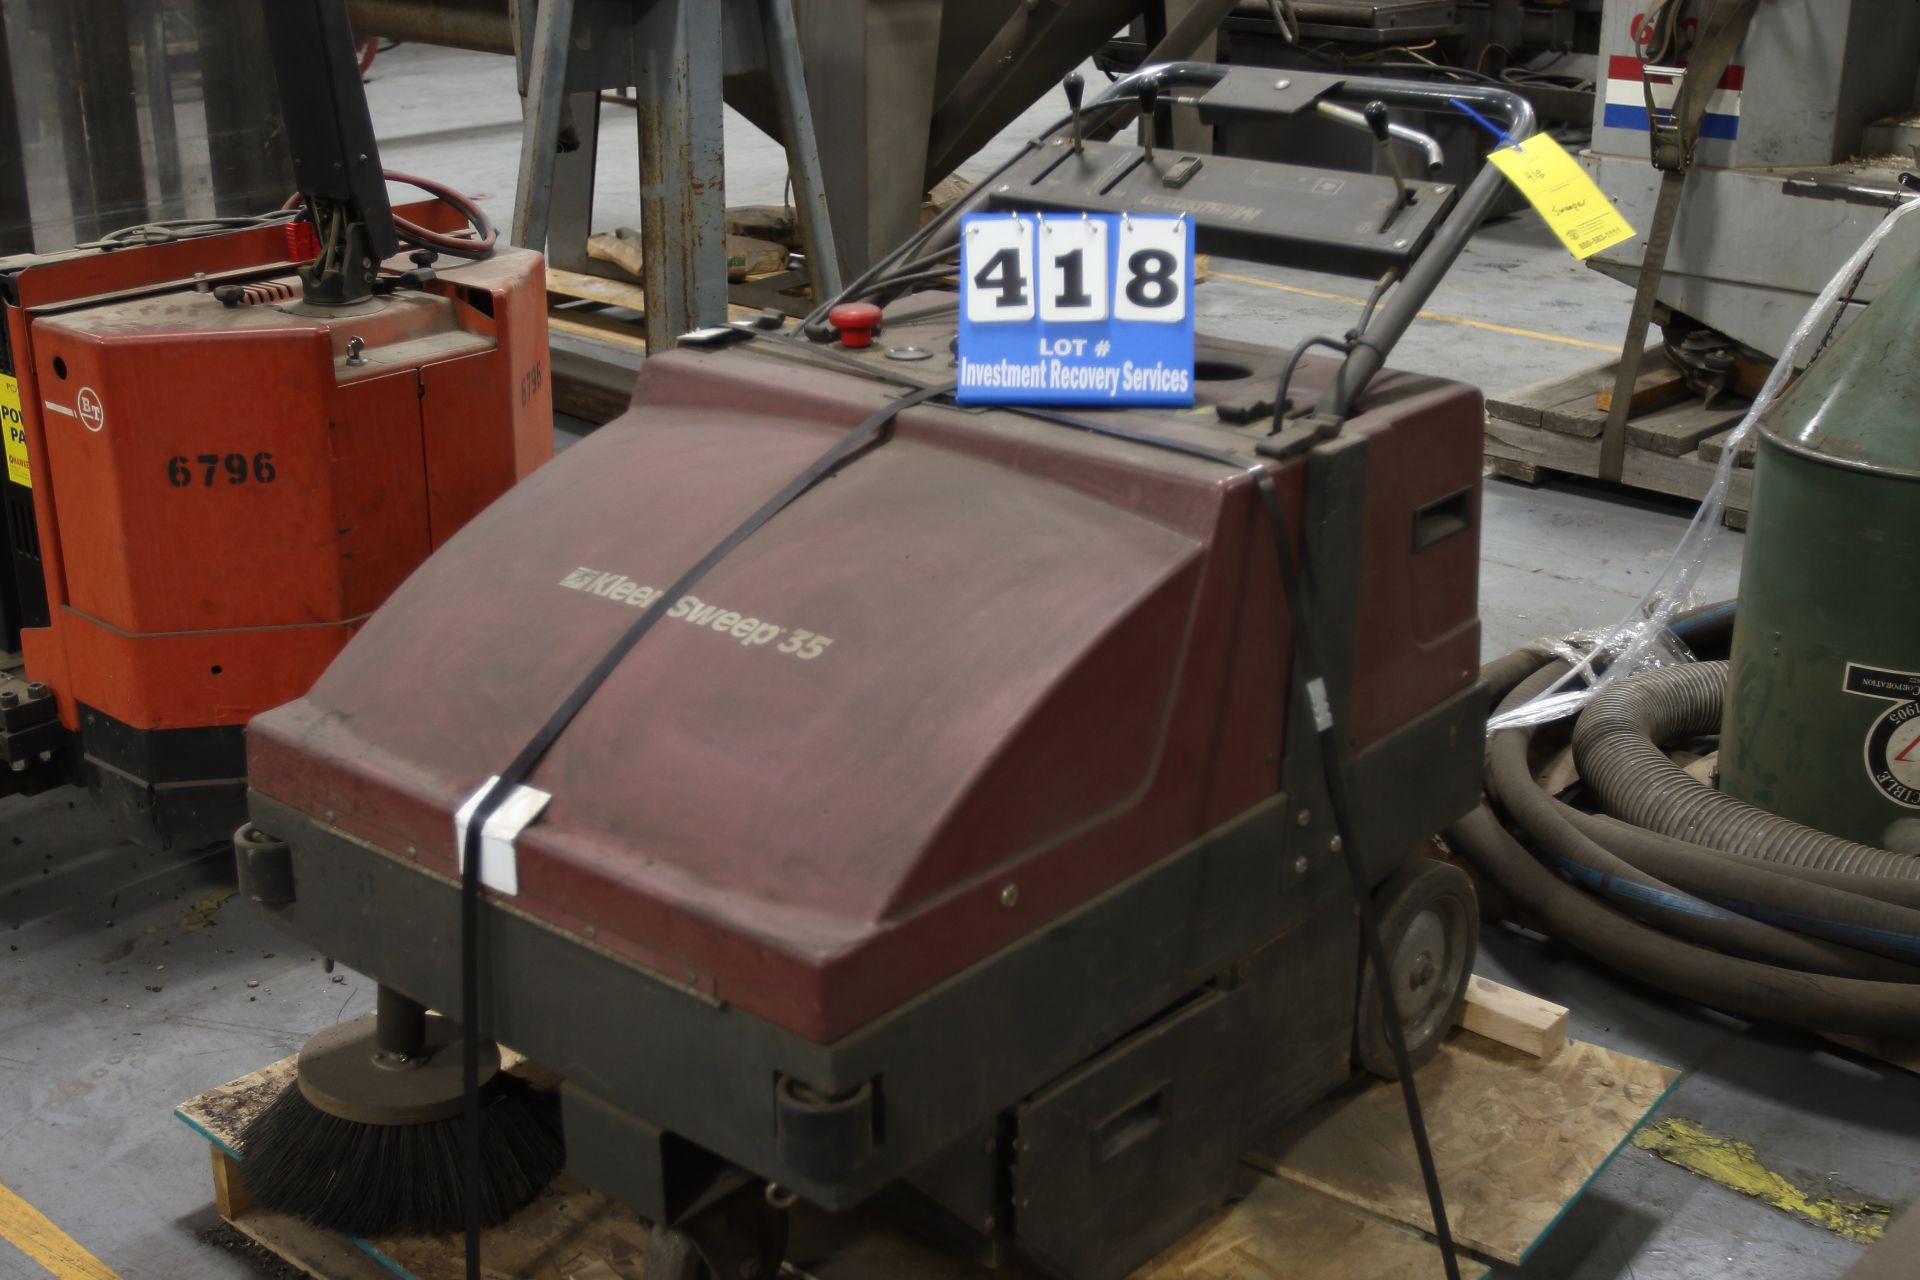 Kleer Sweeper 35 ( LOCATION 4: 850 AEROPLAZA DR, COLORADO SPRINGS, CO 80916 ) - Image 2 of 2